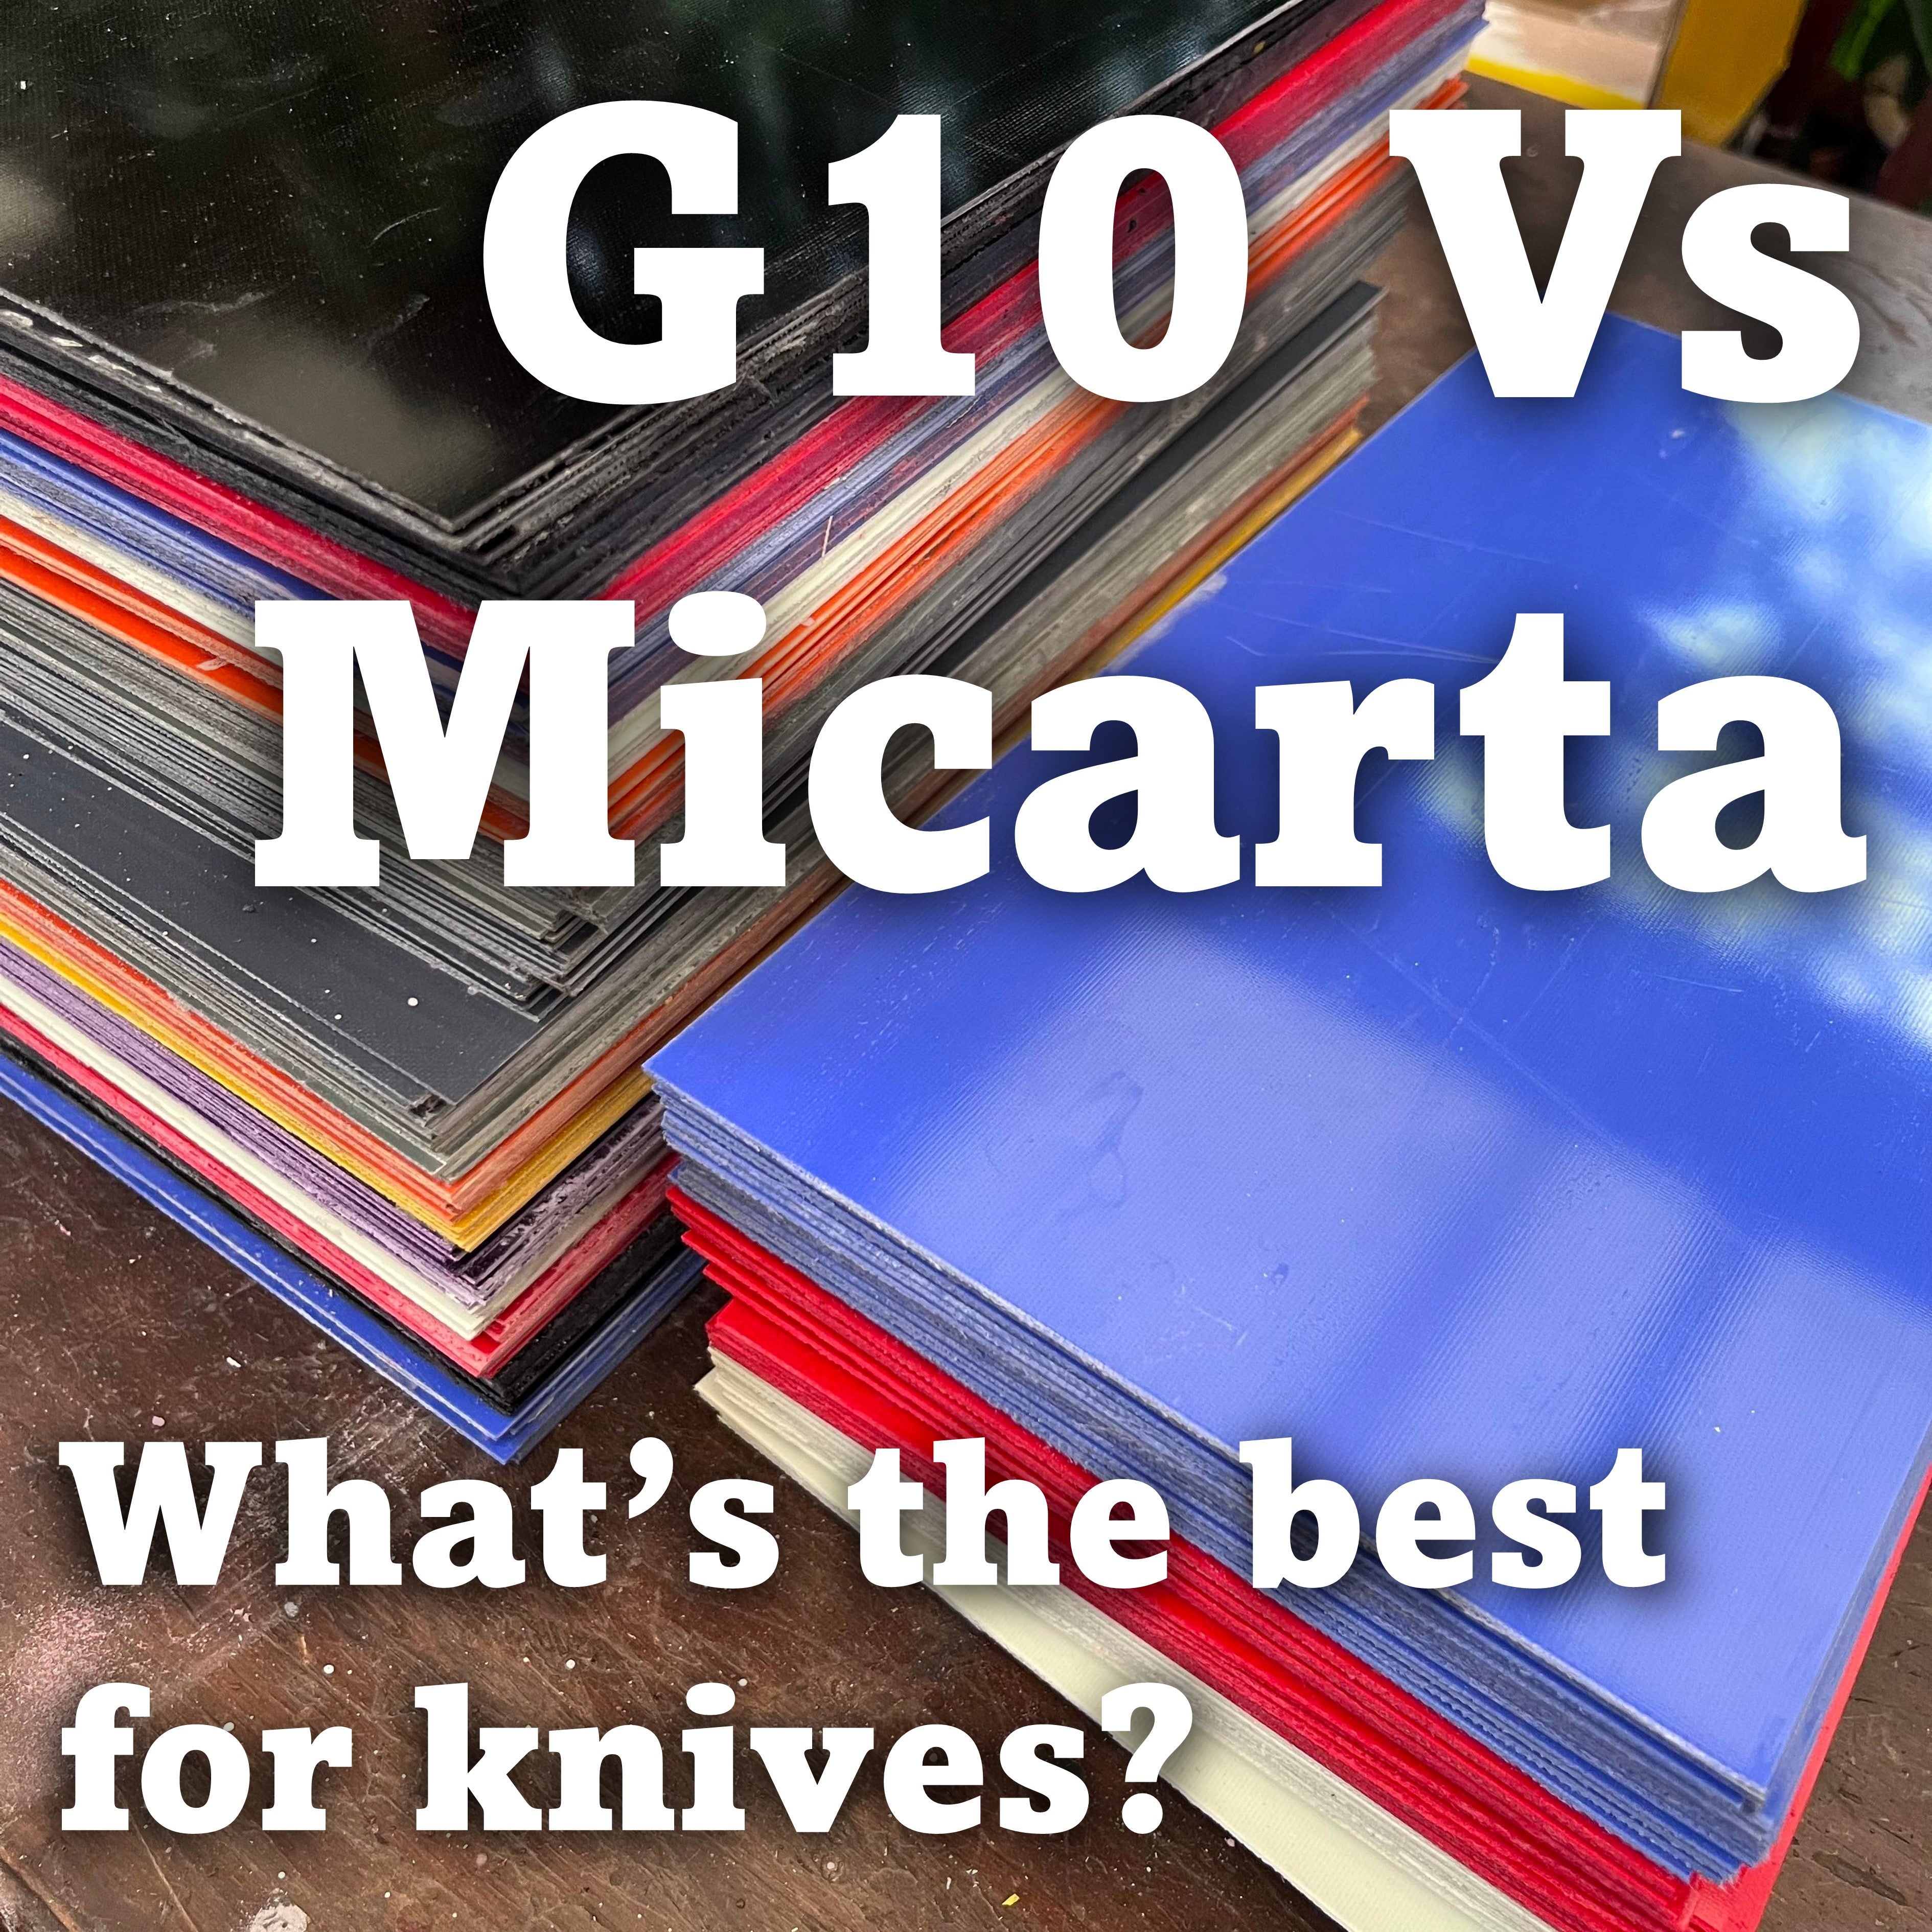 G10 & Micarta, What’s the better handle material? For beginners